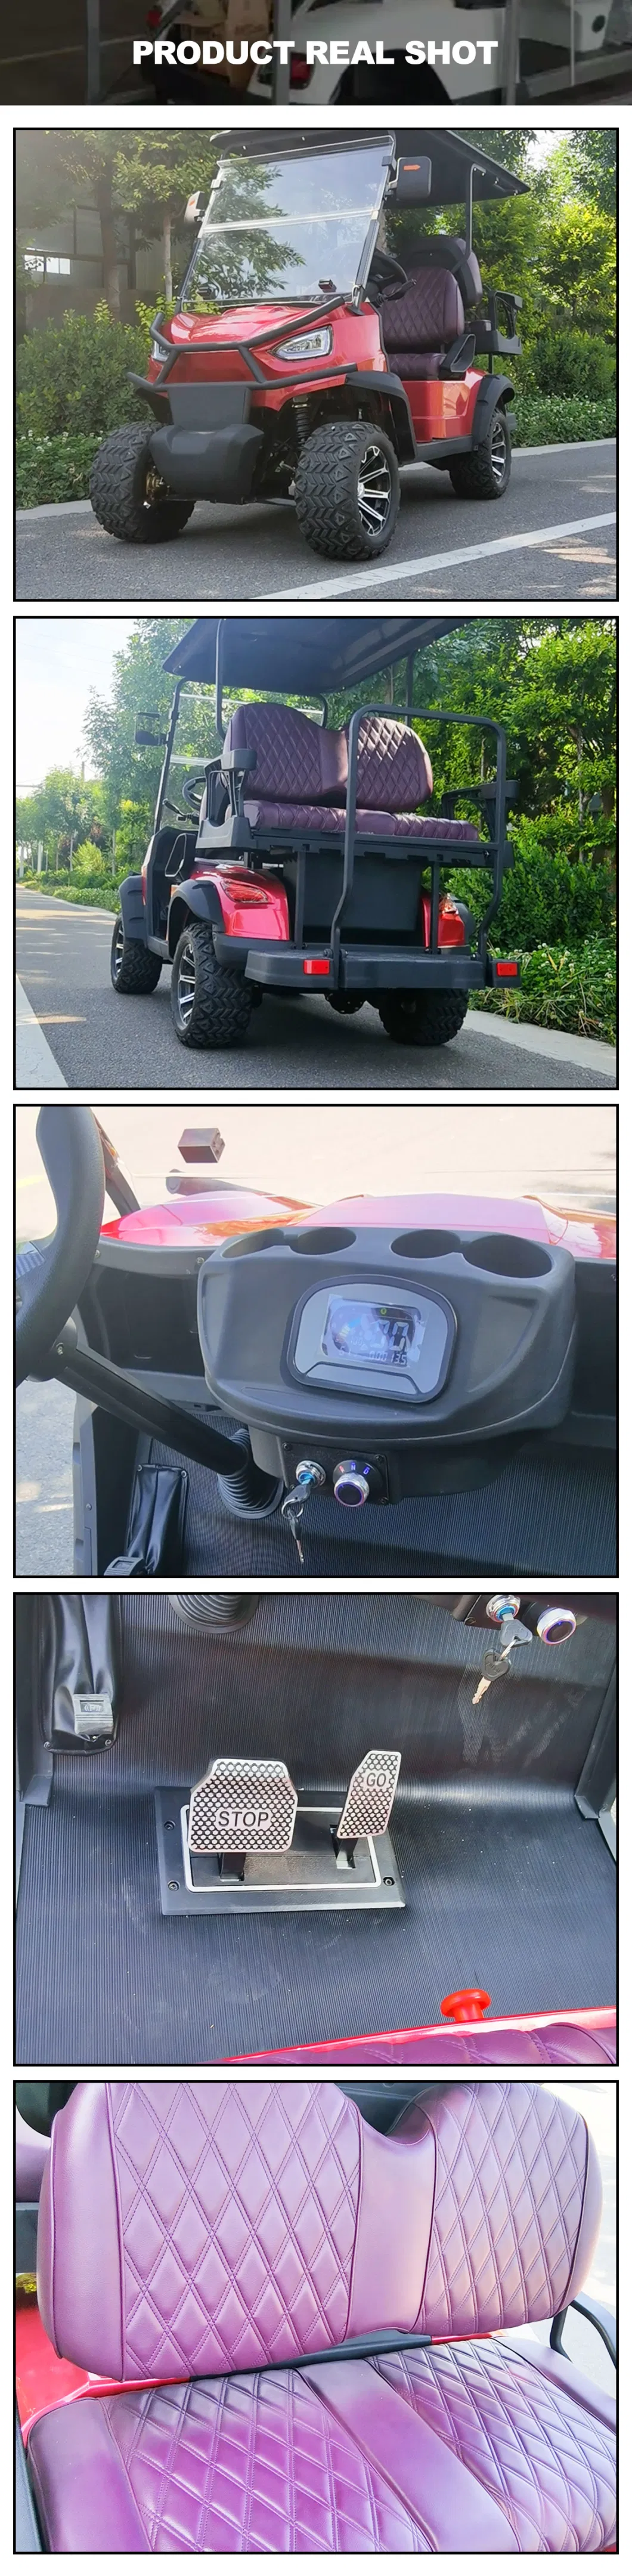 4 Seat Golf Cart En Venta Xela Road Legal AC Motor Golf Cart Manufacturers The Villages Electric Black Golf Cart with Parts for Sale